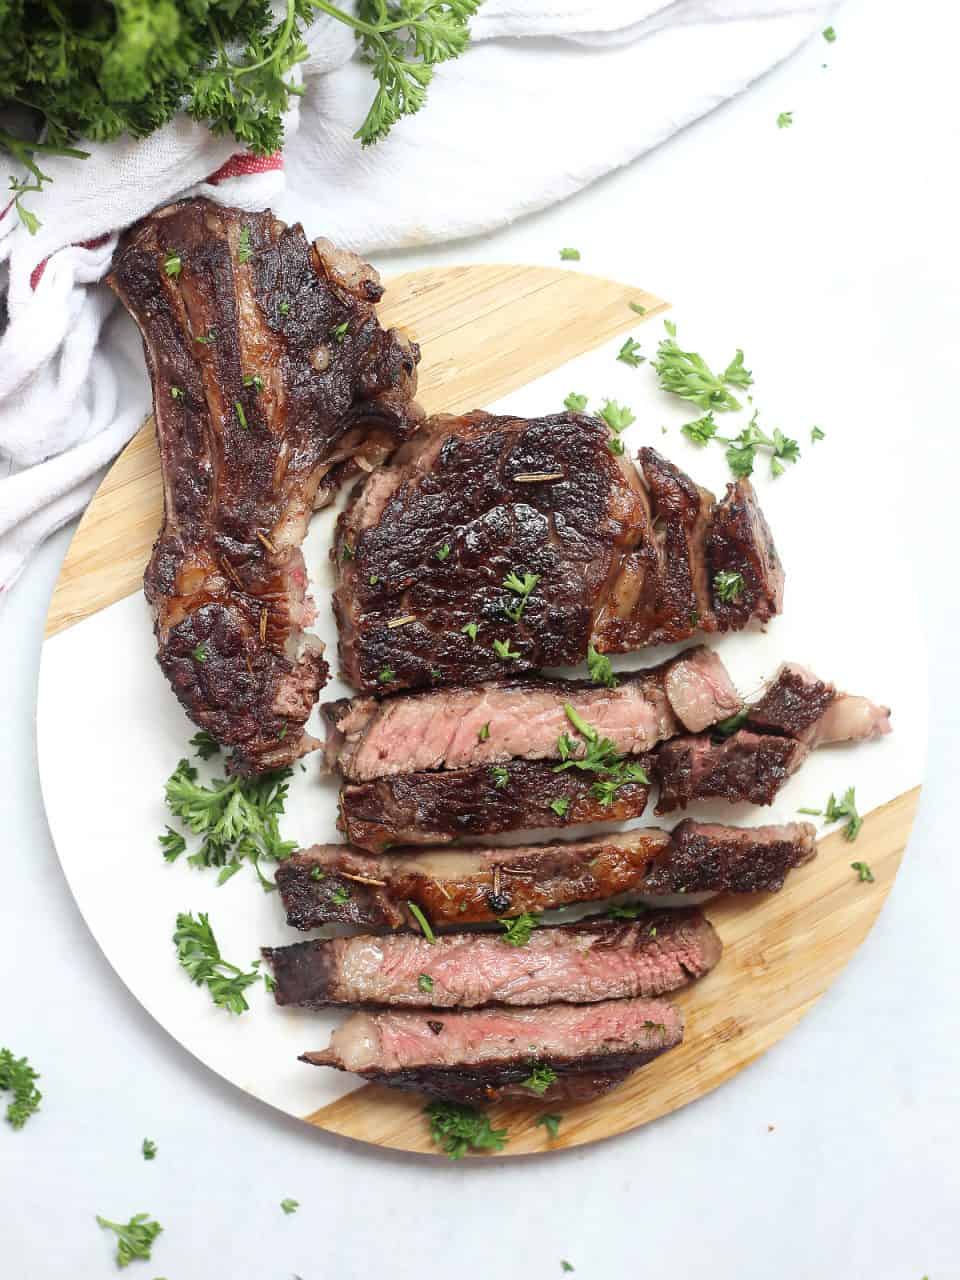 Sliced red wine marinated steak on a circular chopping board and garnished with fresh parsley.